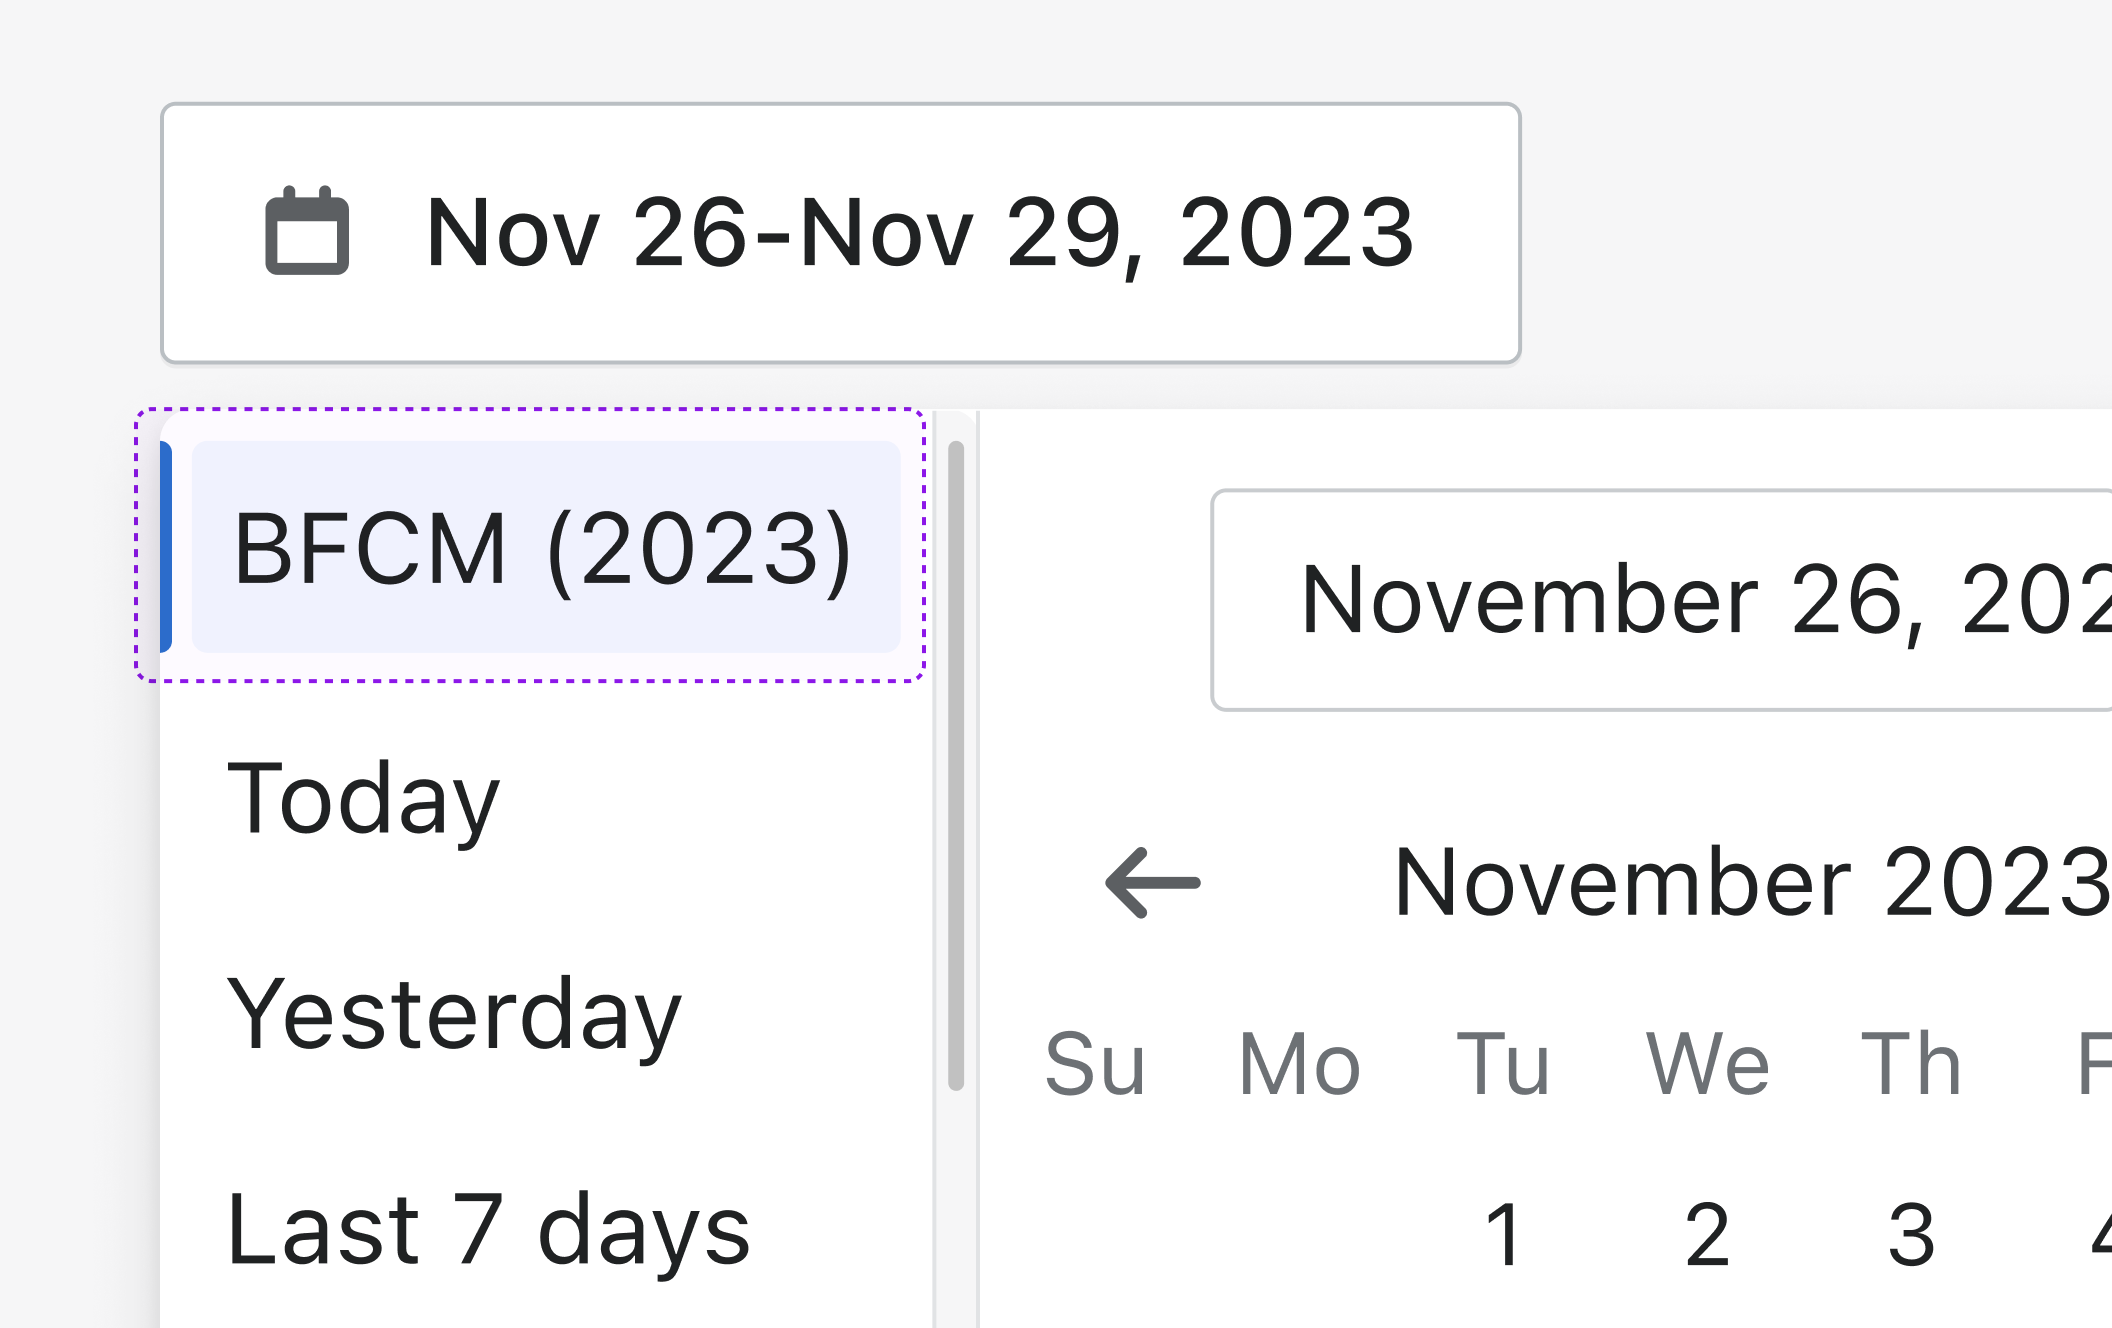 List of date options such as “BFCM (2023)”